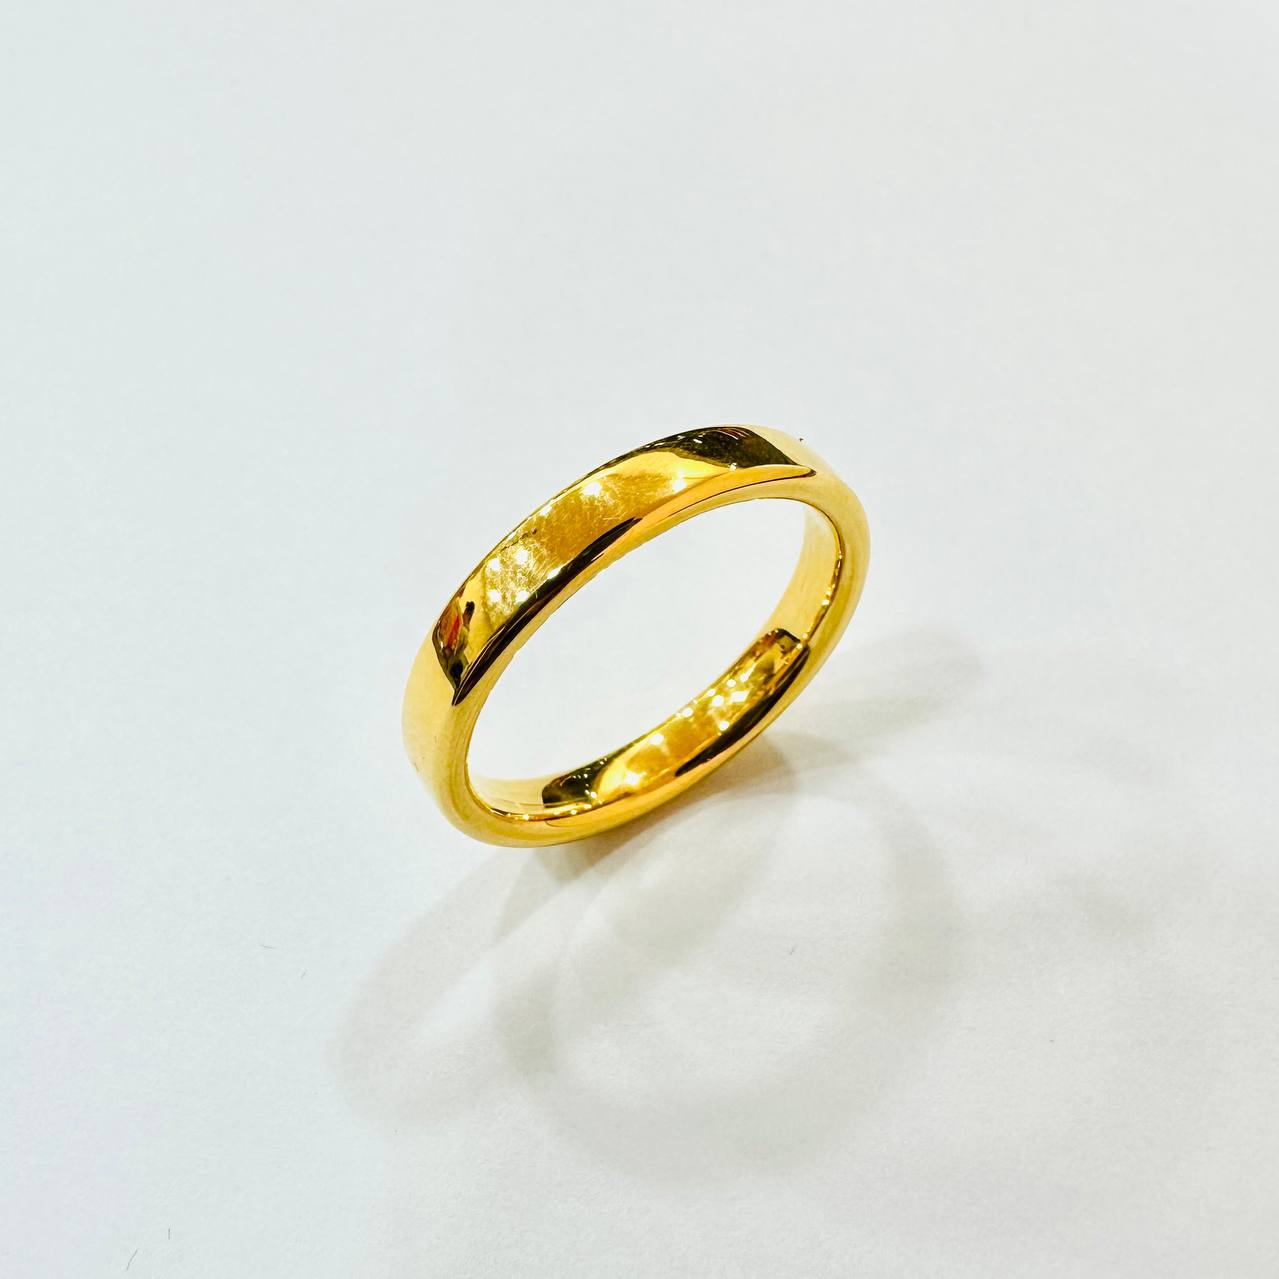 22k / 916 Gold Hollow Shiny Smooth Ring-916 gold-Best Gold Shop